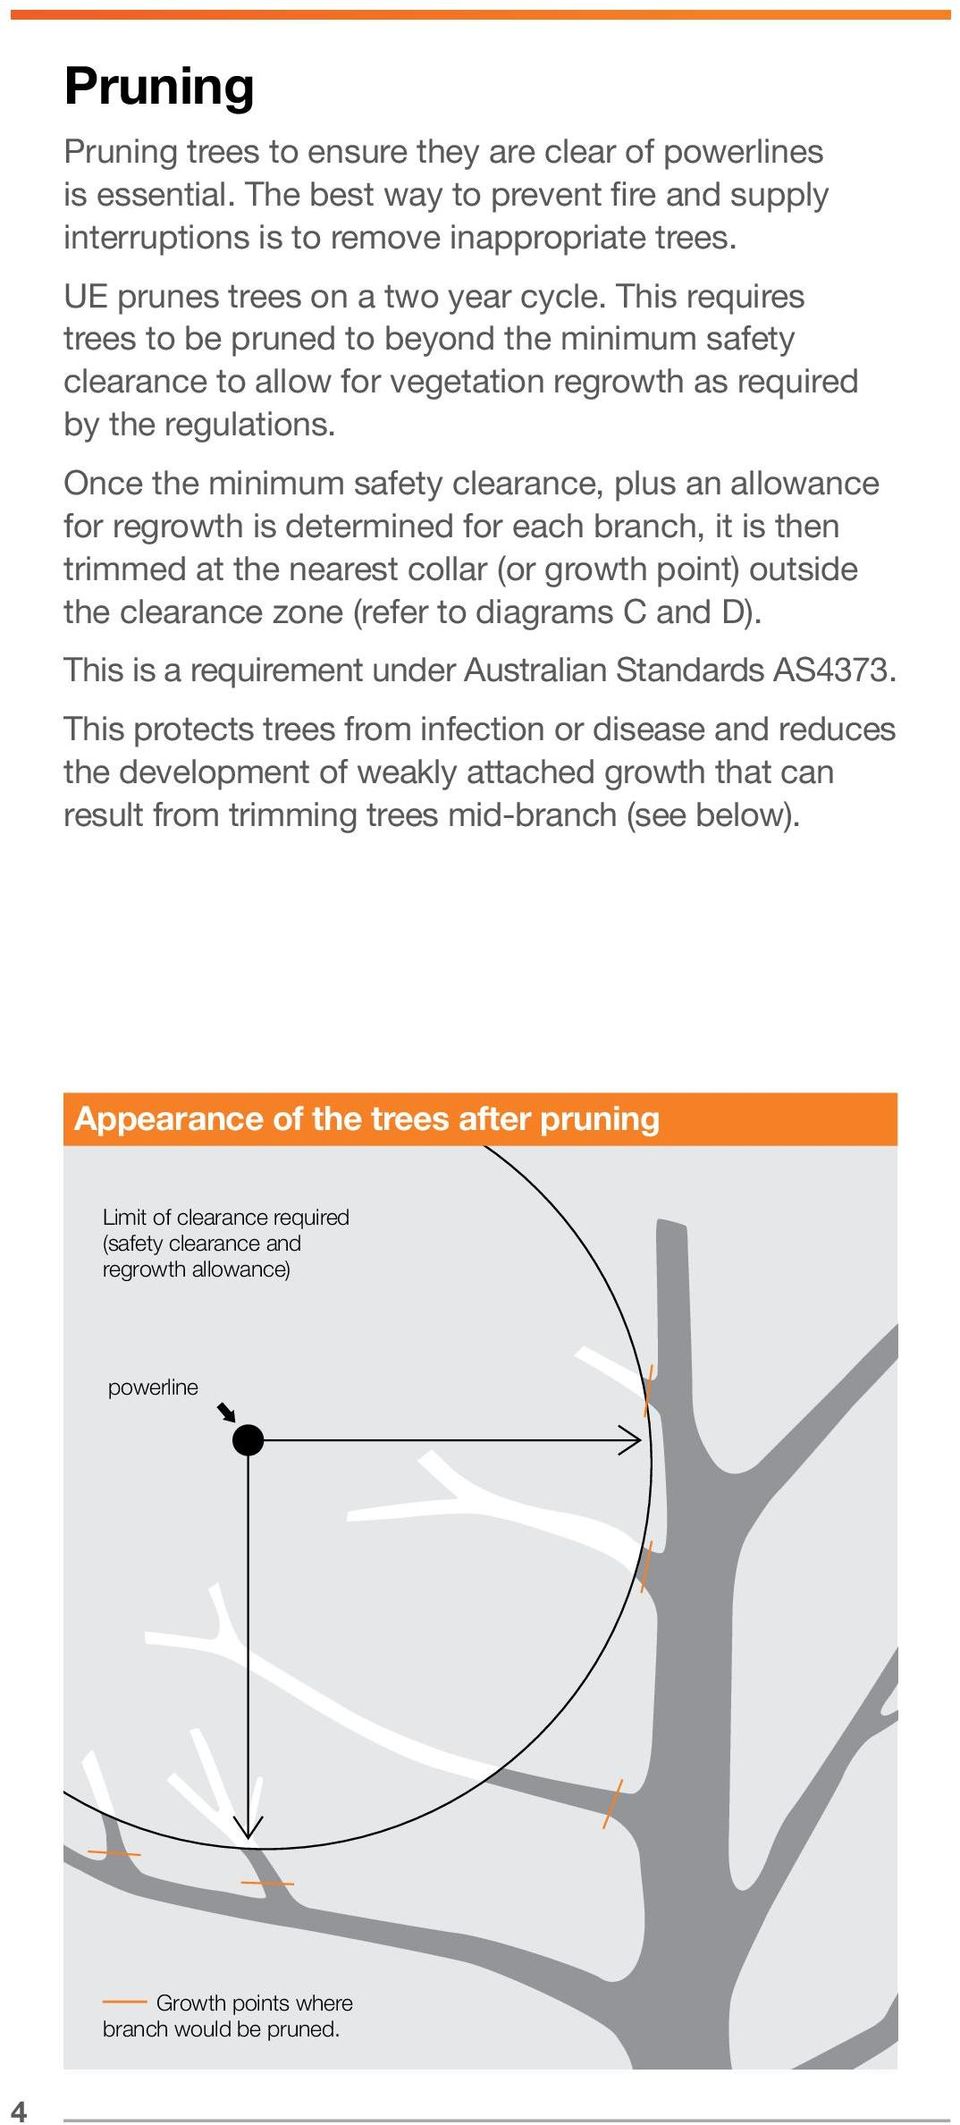 Once the minimum safety clearance, plus an allowance for regrowth is determined for each branch, it is then trimmed at the nearest collar (or growth point) outside the clearance zone (refer to